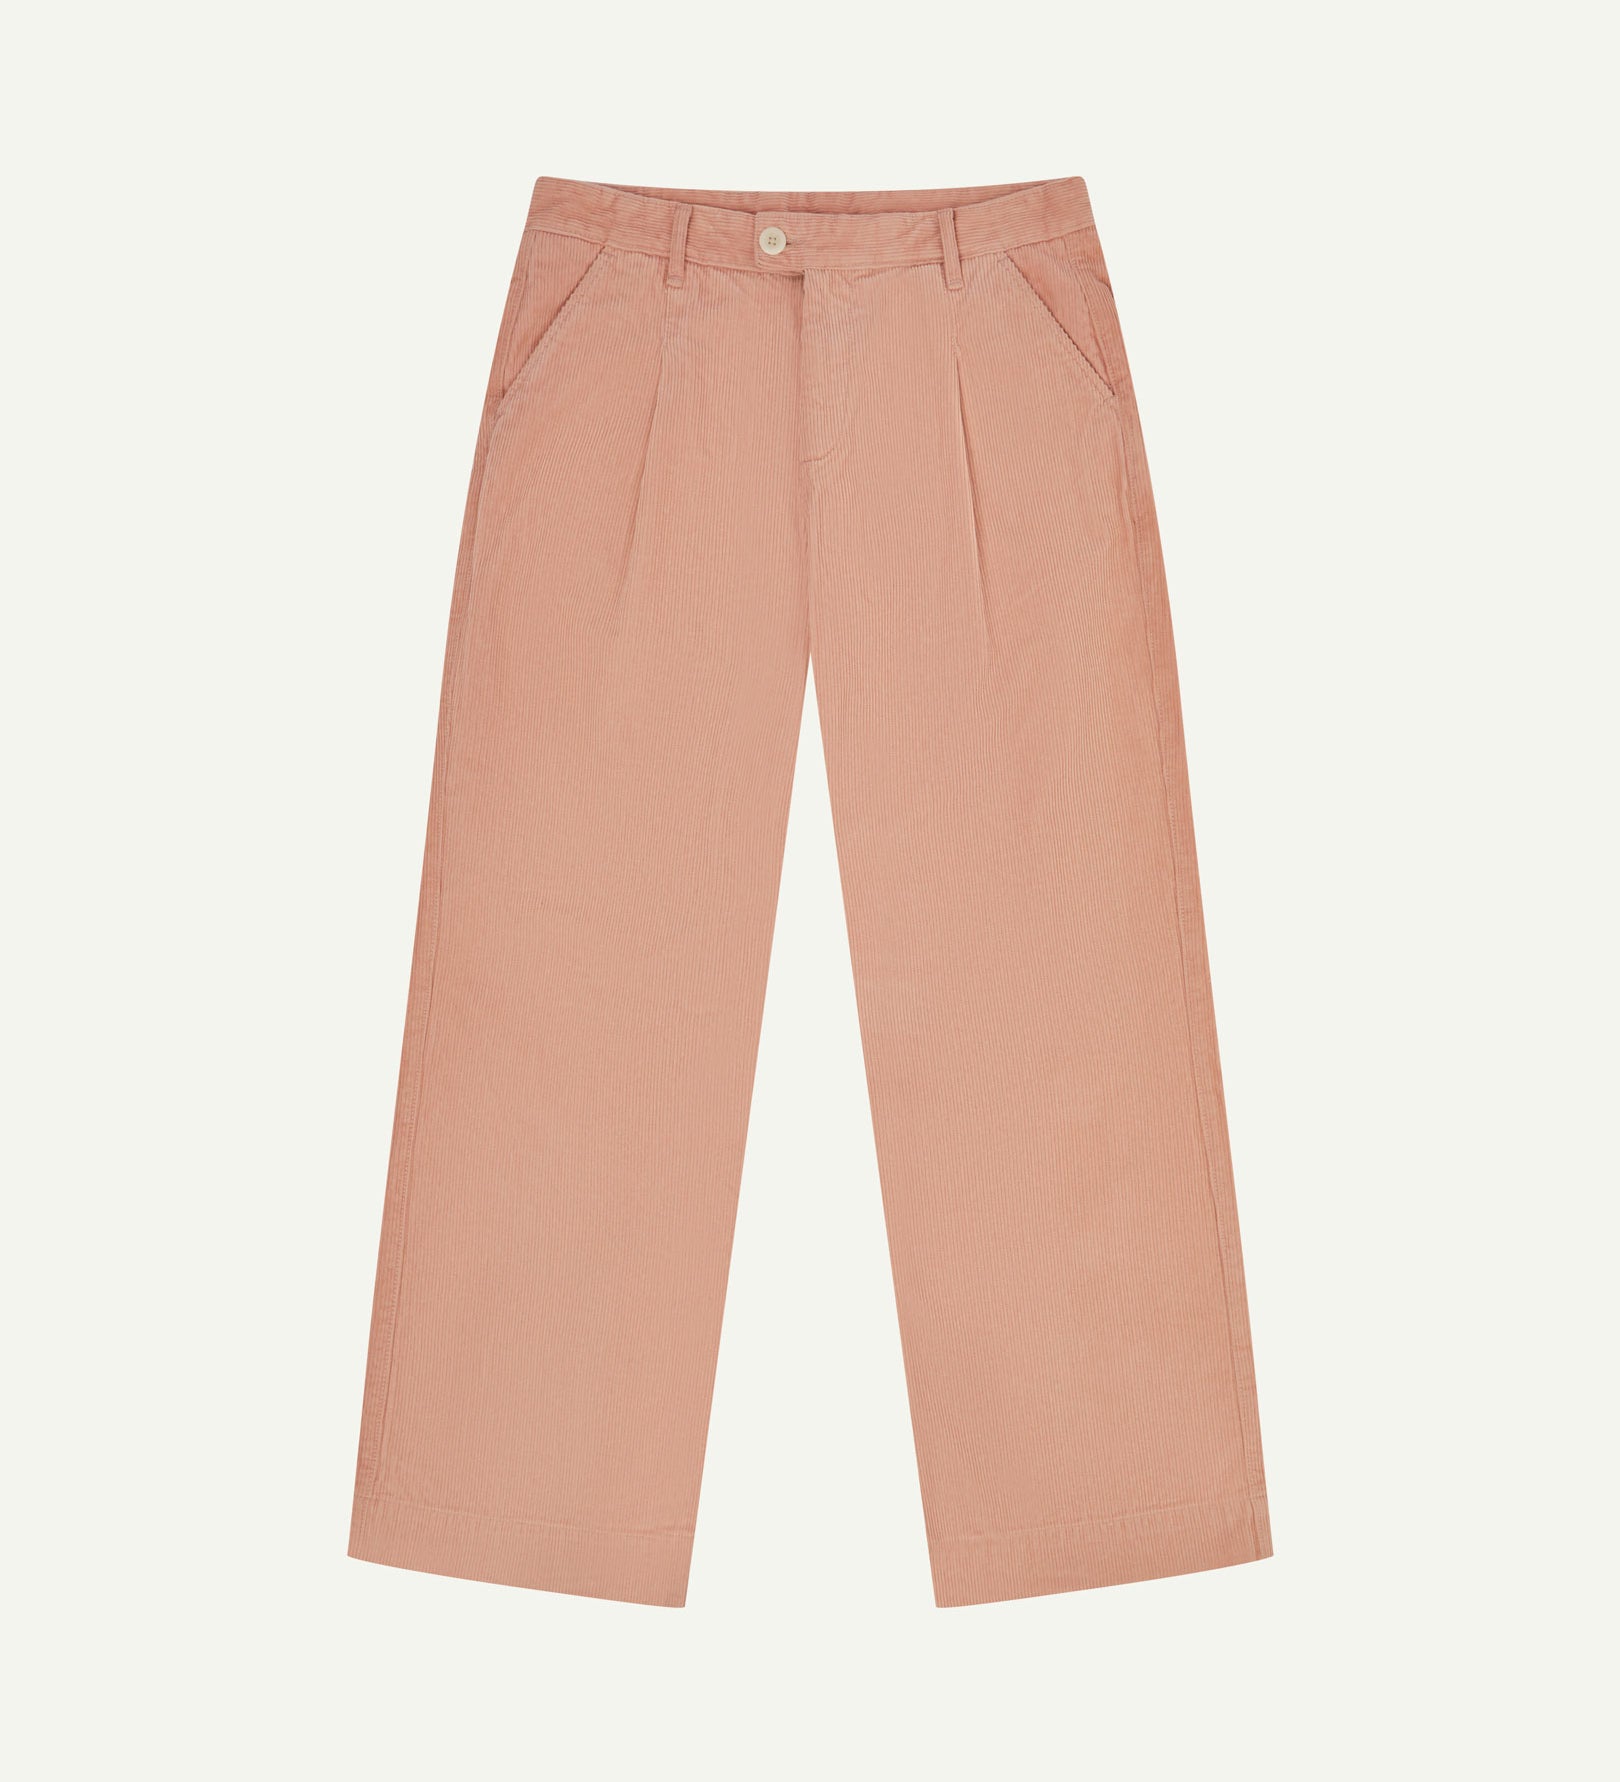 Front flat view of Uskees cord boat pants in dusty pink. Showing Corozo button fastening and wide leg fit.